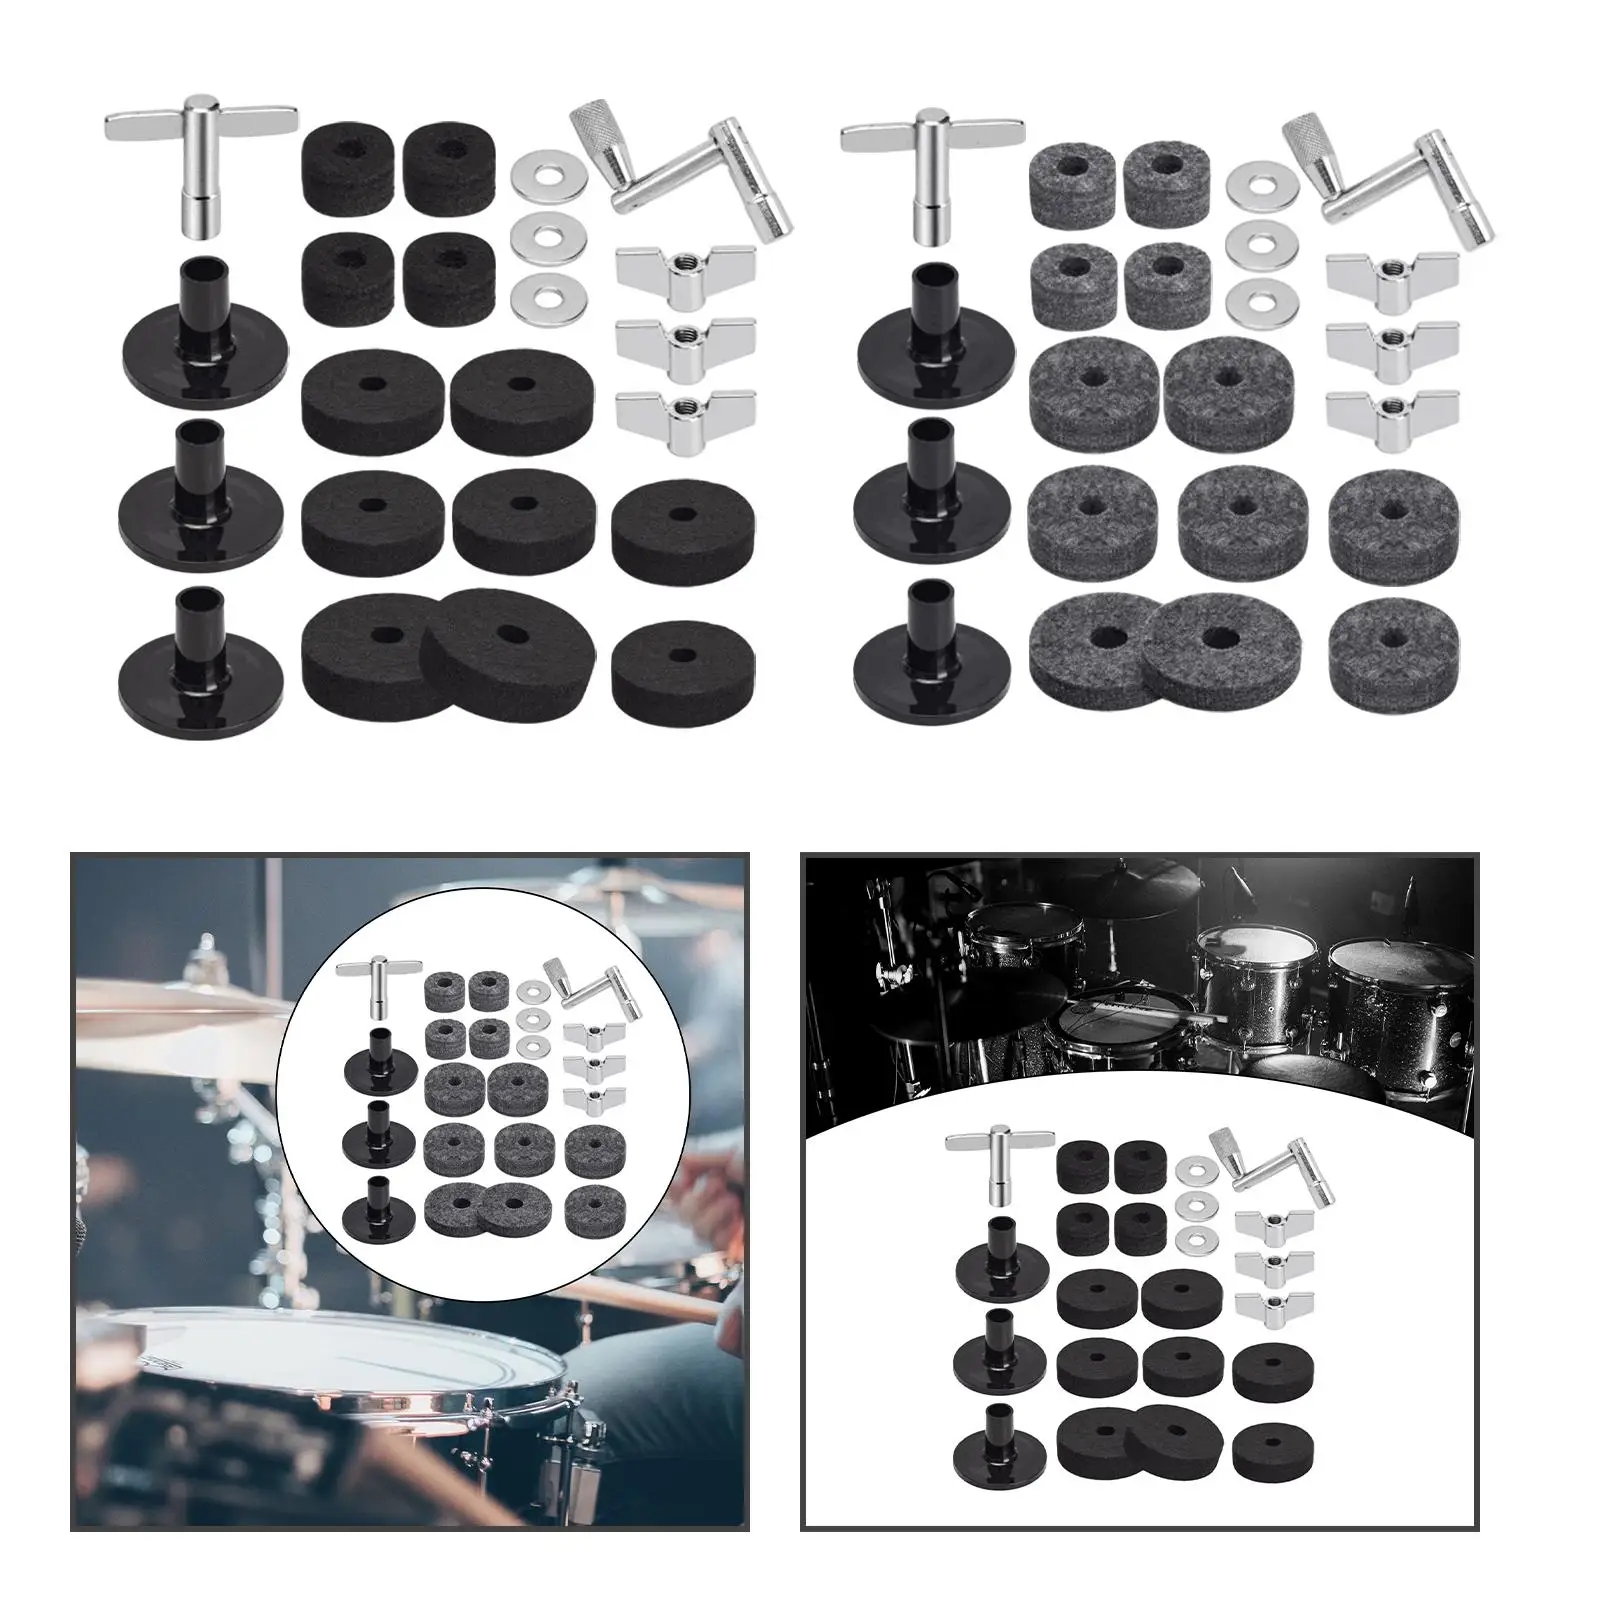 23x Cymbal Sleeve and Felt Cymbal Replacement Accessory for Shelf Drum Kits